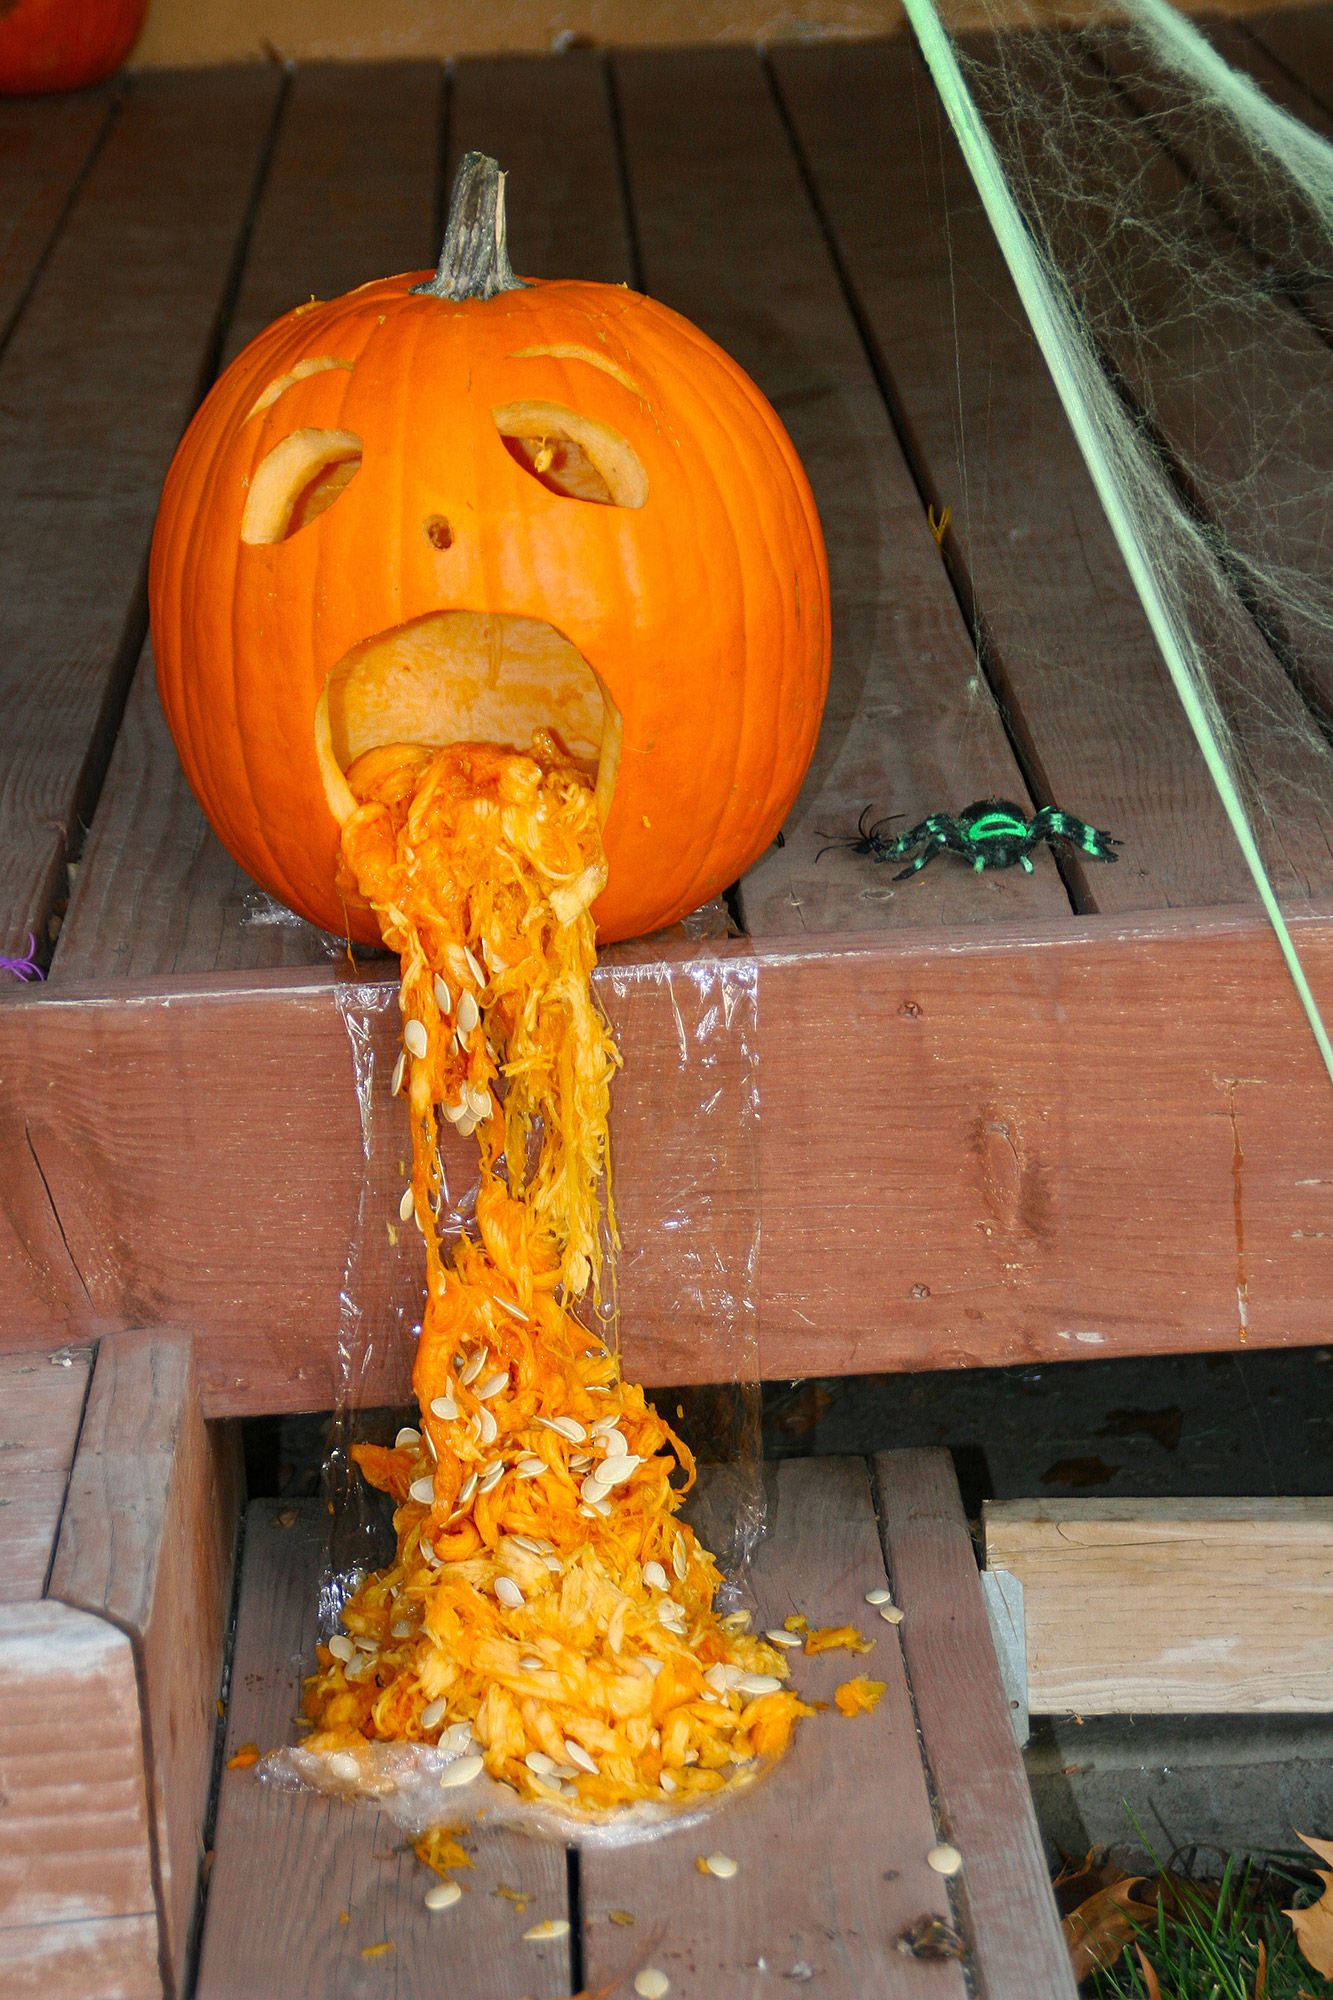 10-reasons-these-pumpkins-are-puking